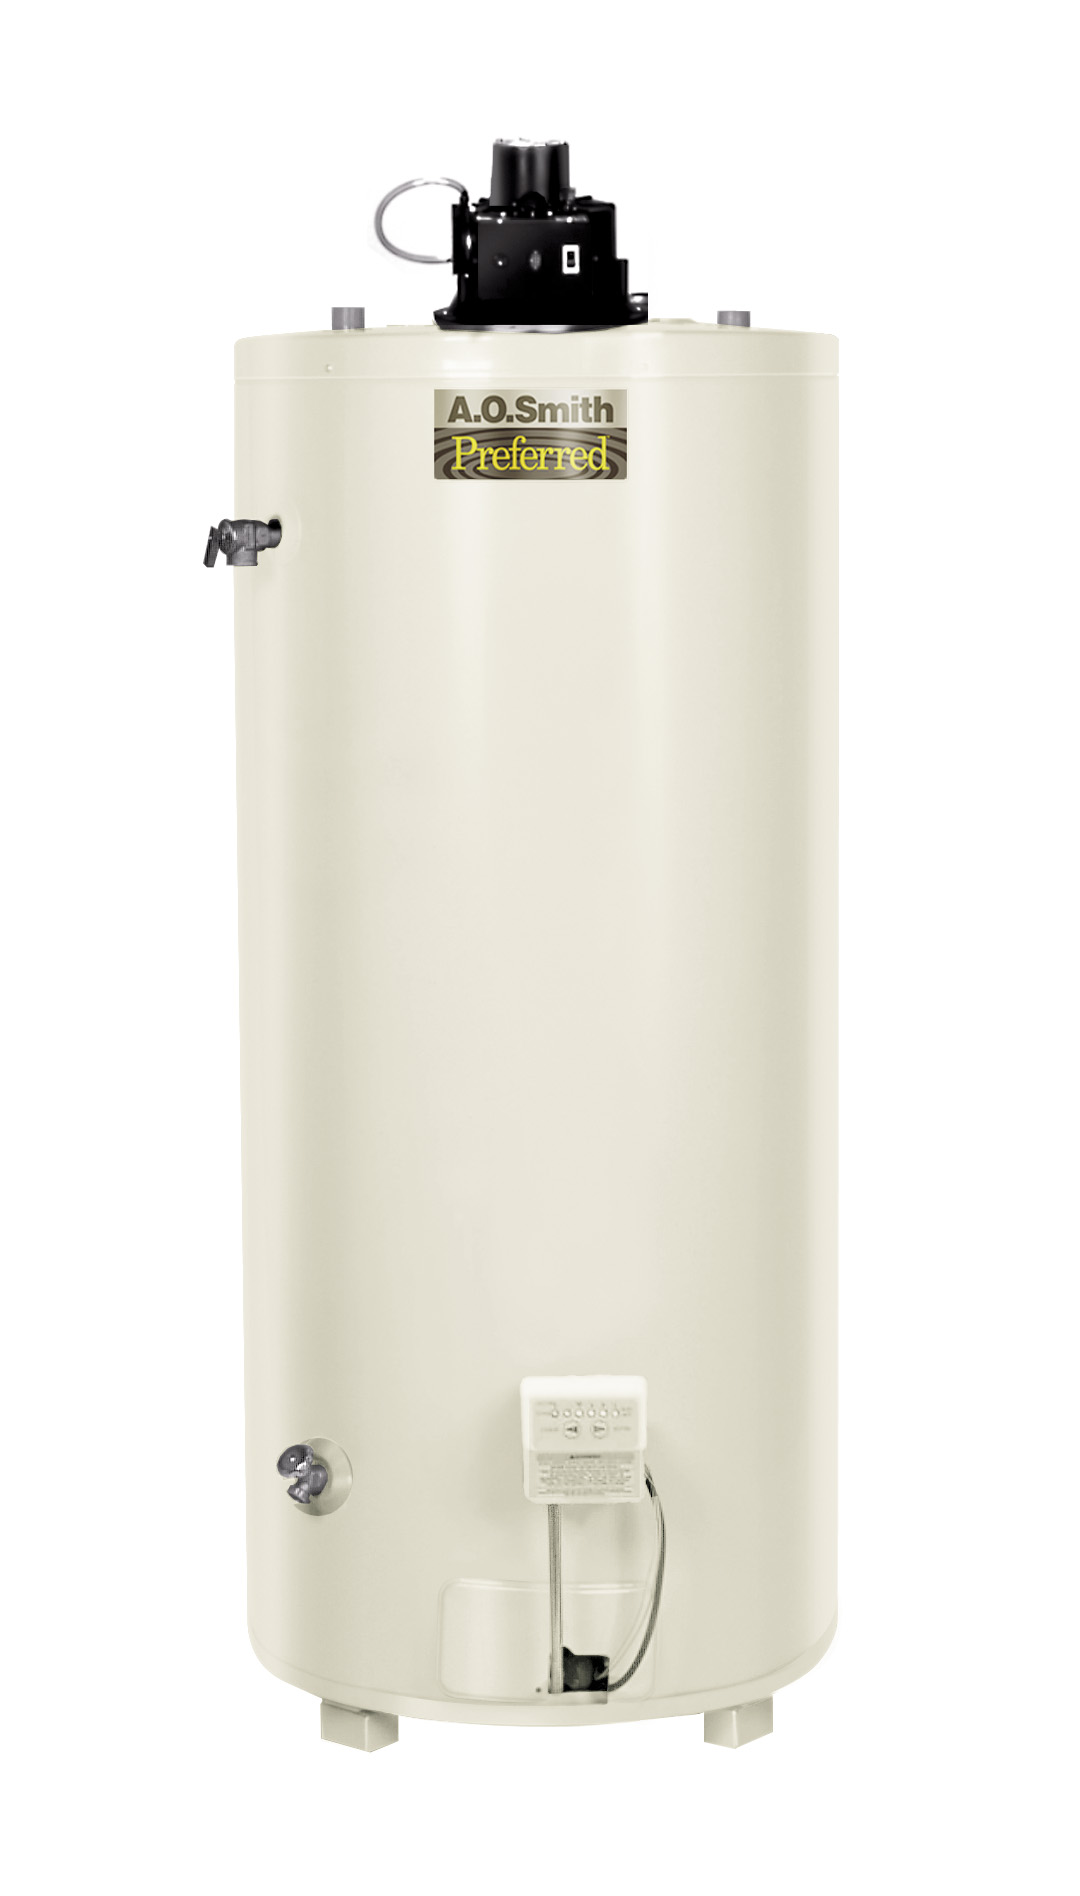 AO SMITH BTF-80: 74 GALLON, 76,500 BTU, 4" VENT, CONSERVATIONIST POWER VENT SINGLE FLUE, NATURAL GAS COMMERICAL WATER HEATER